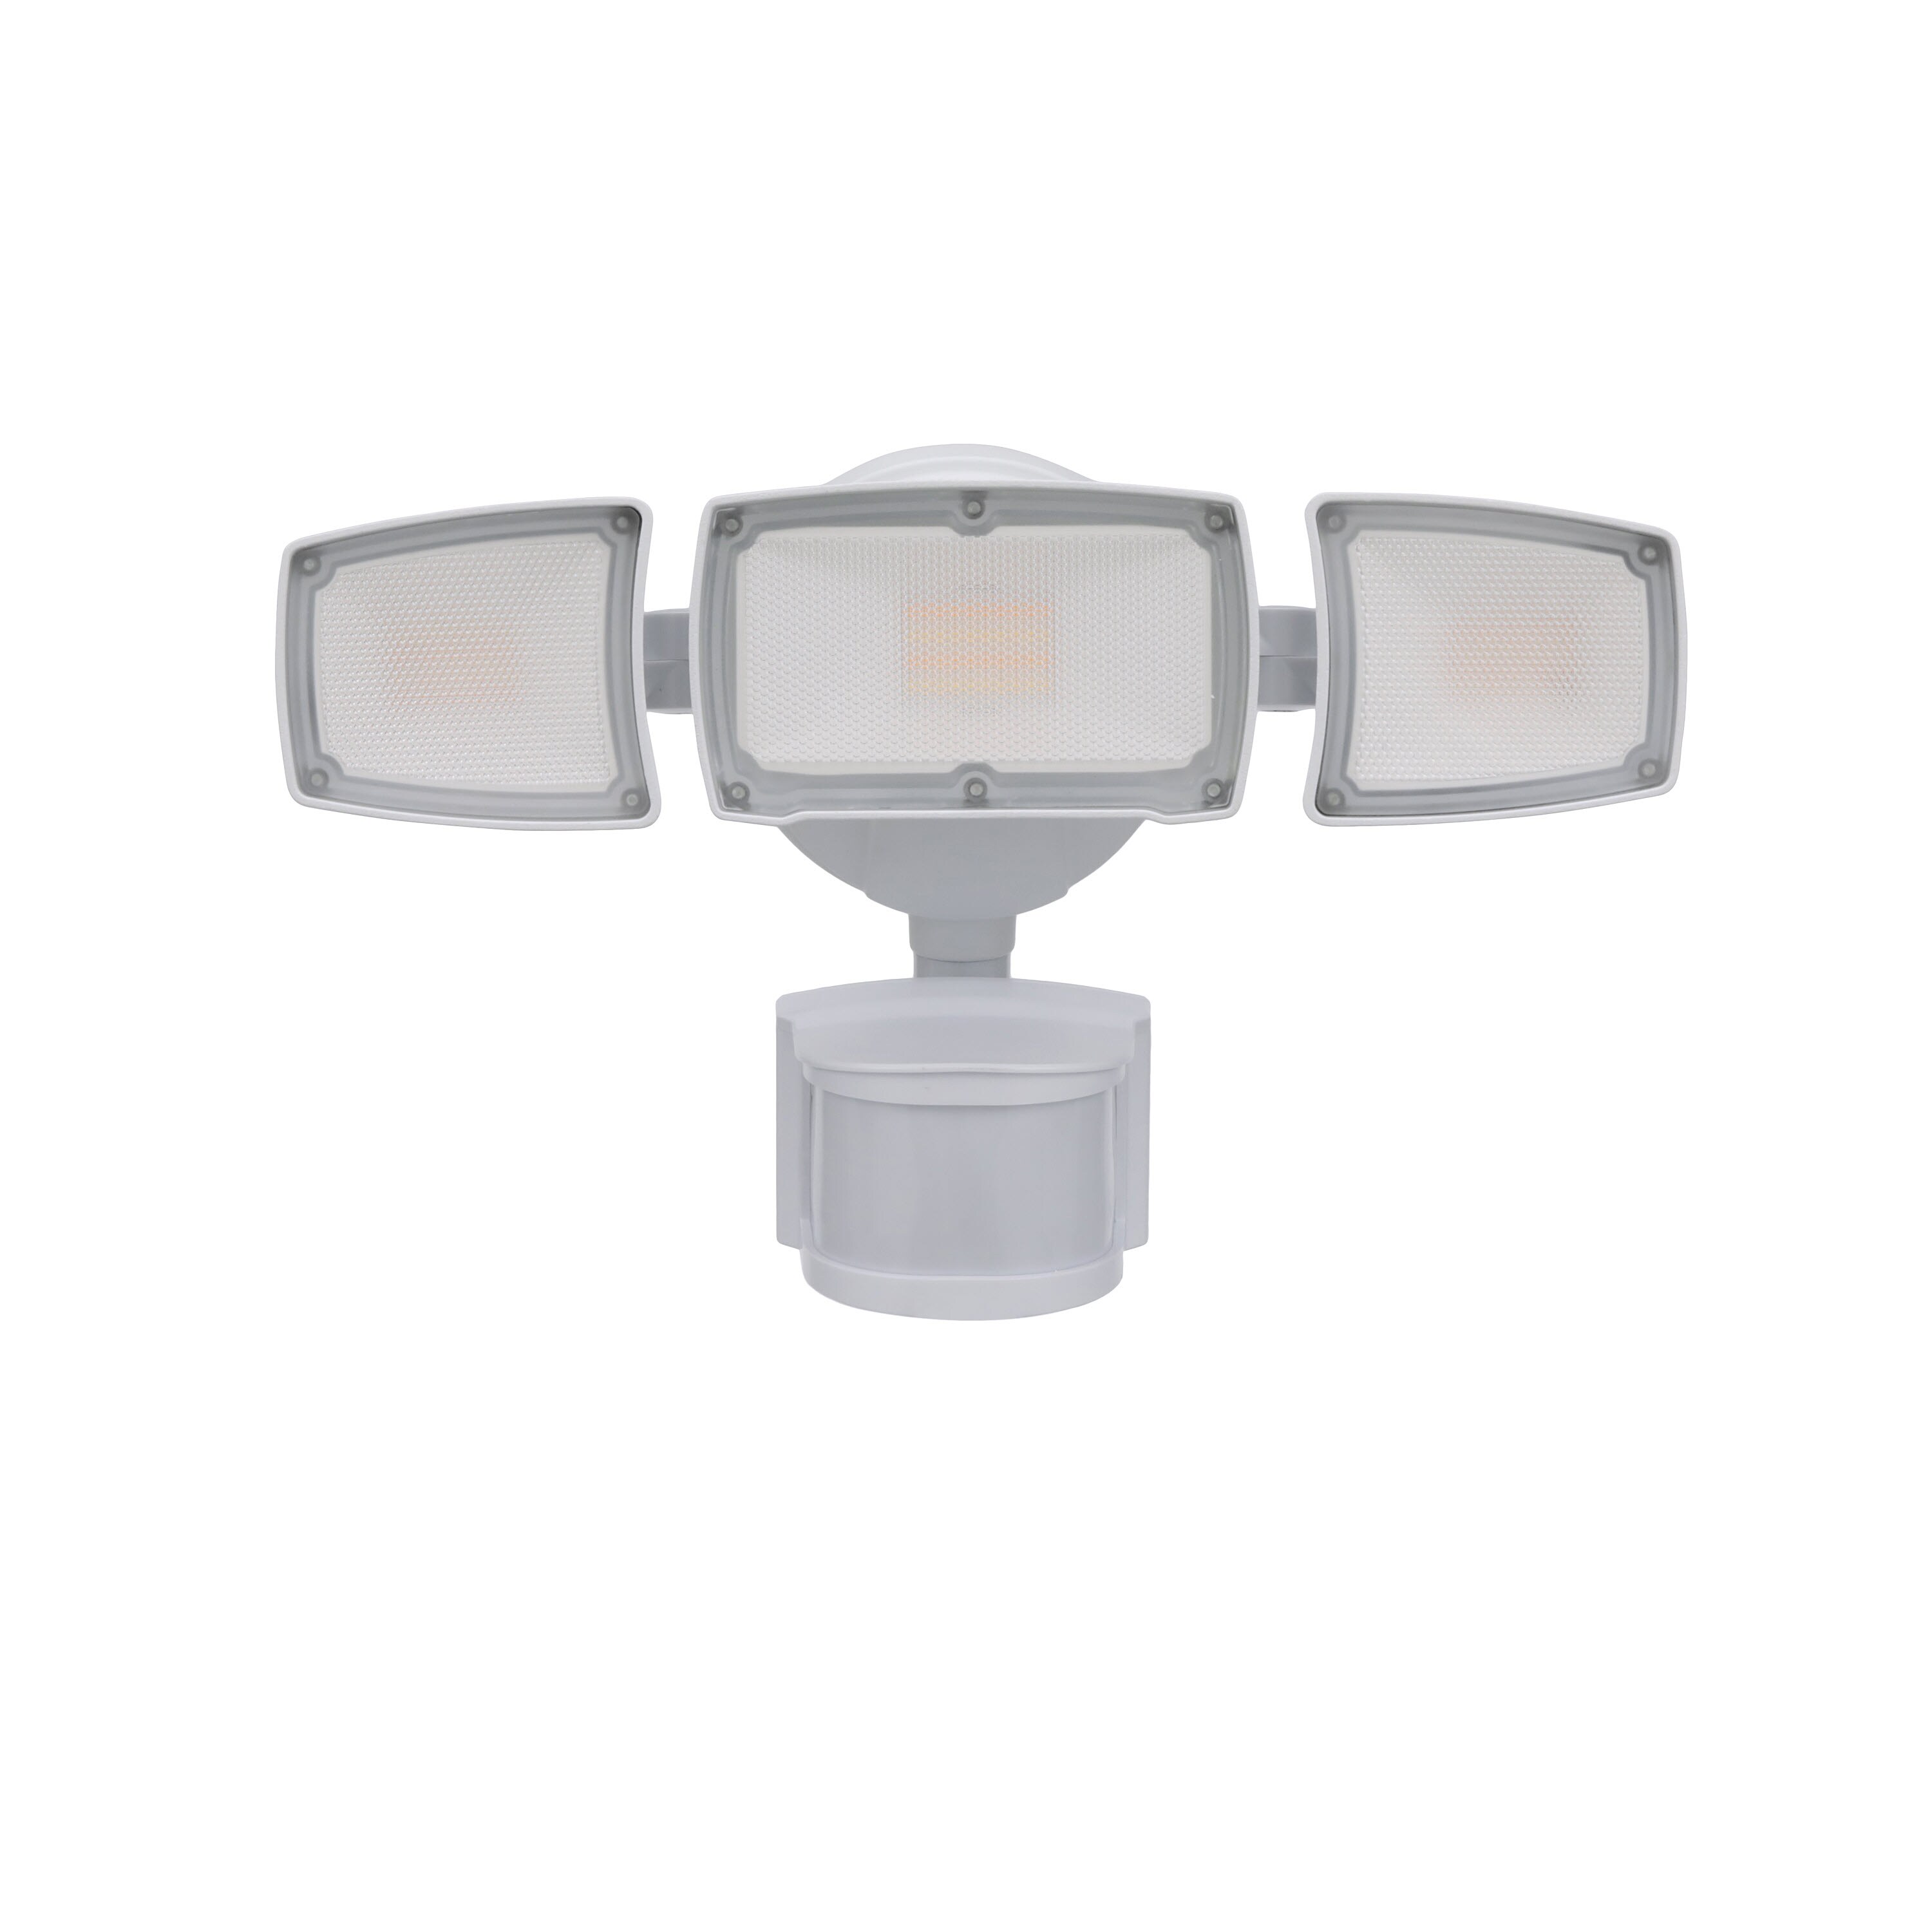 Weatherproof & Waterproof. Adjustable light on timer from 5 Seconds to 12 Minutes 2 x Outdoor PIR Security Lights Floodlamp Silver Floodlight with PIR Motion Detector Sensor Movement activated